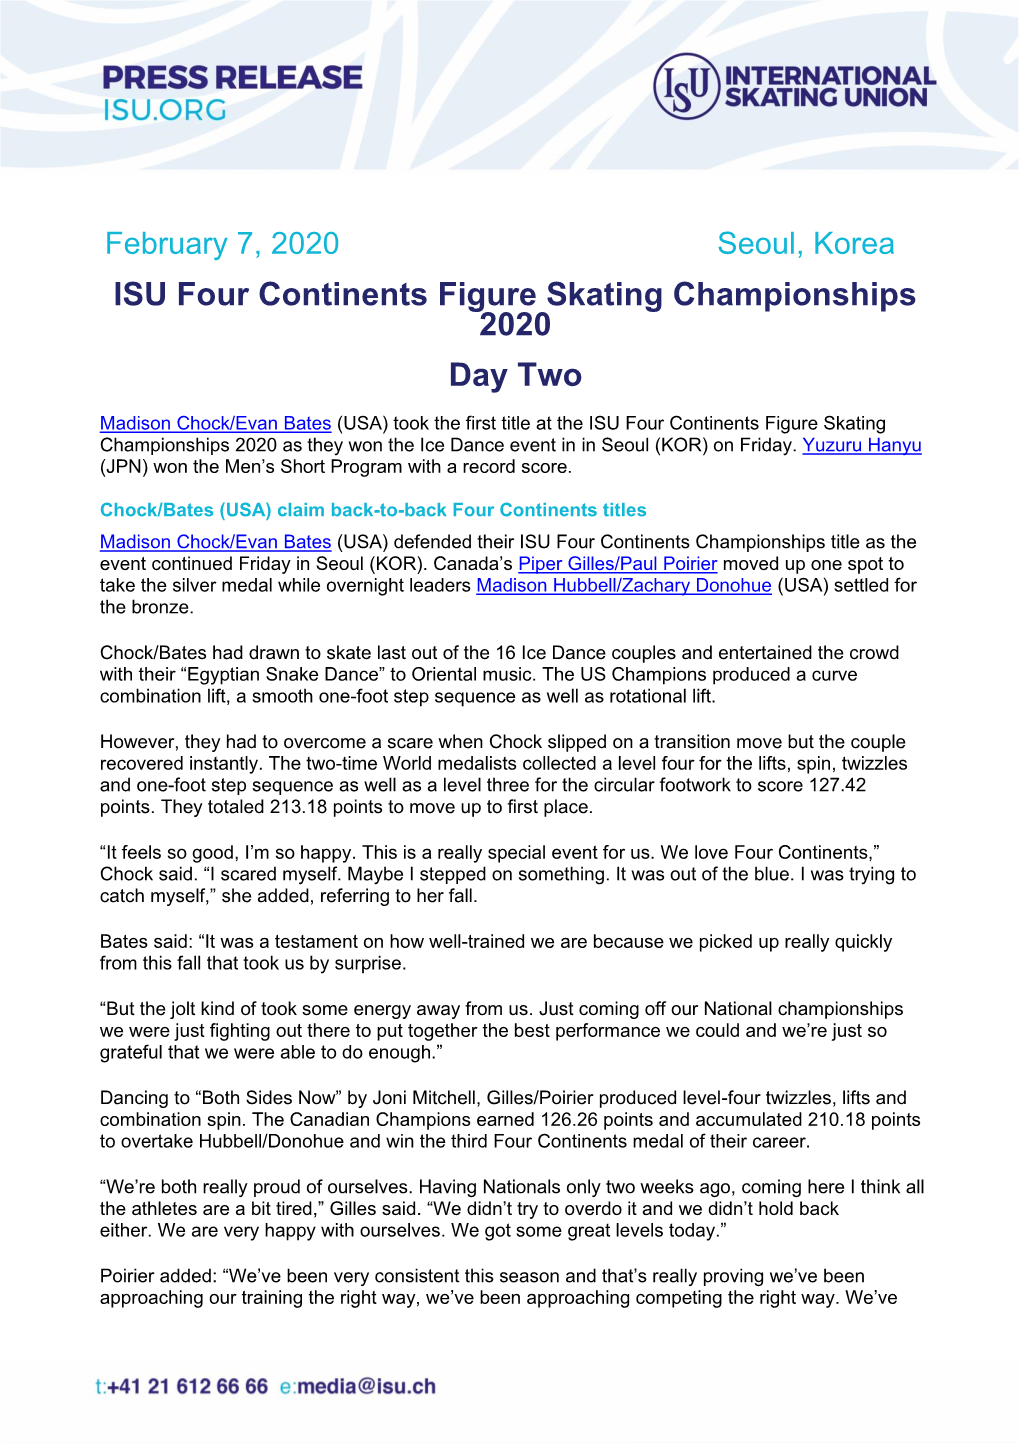 ISU Four Continents Figure Skating Championships 2020 Day Two